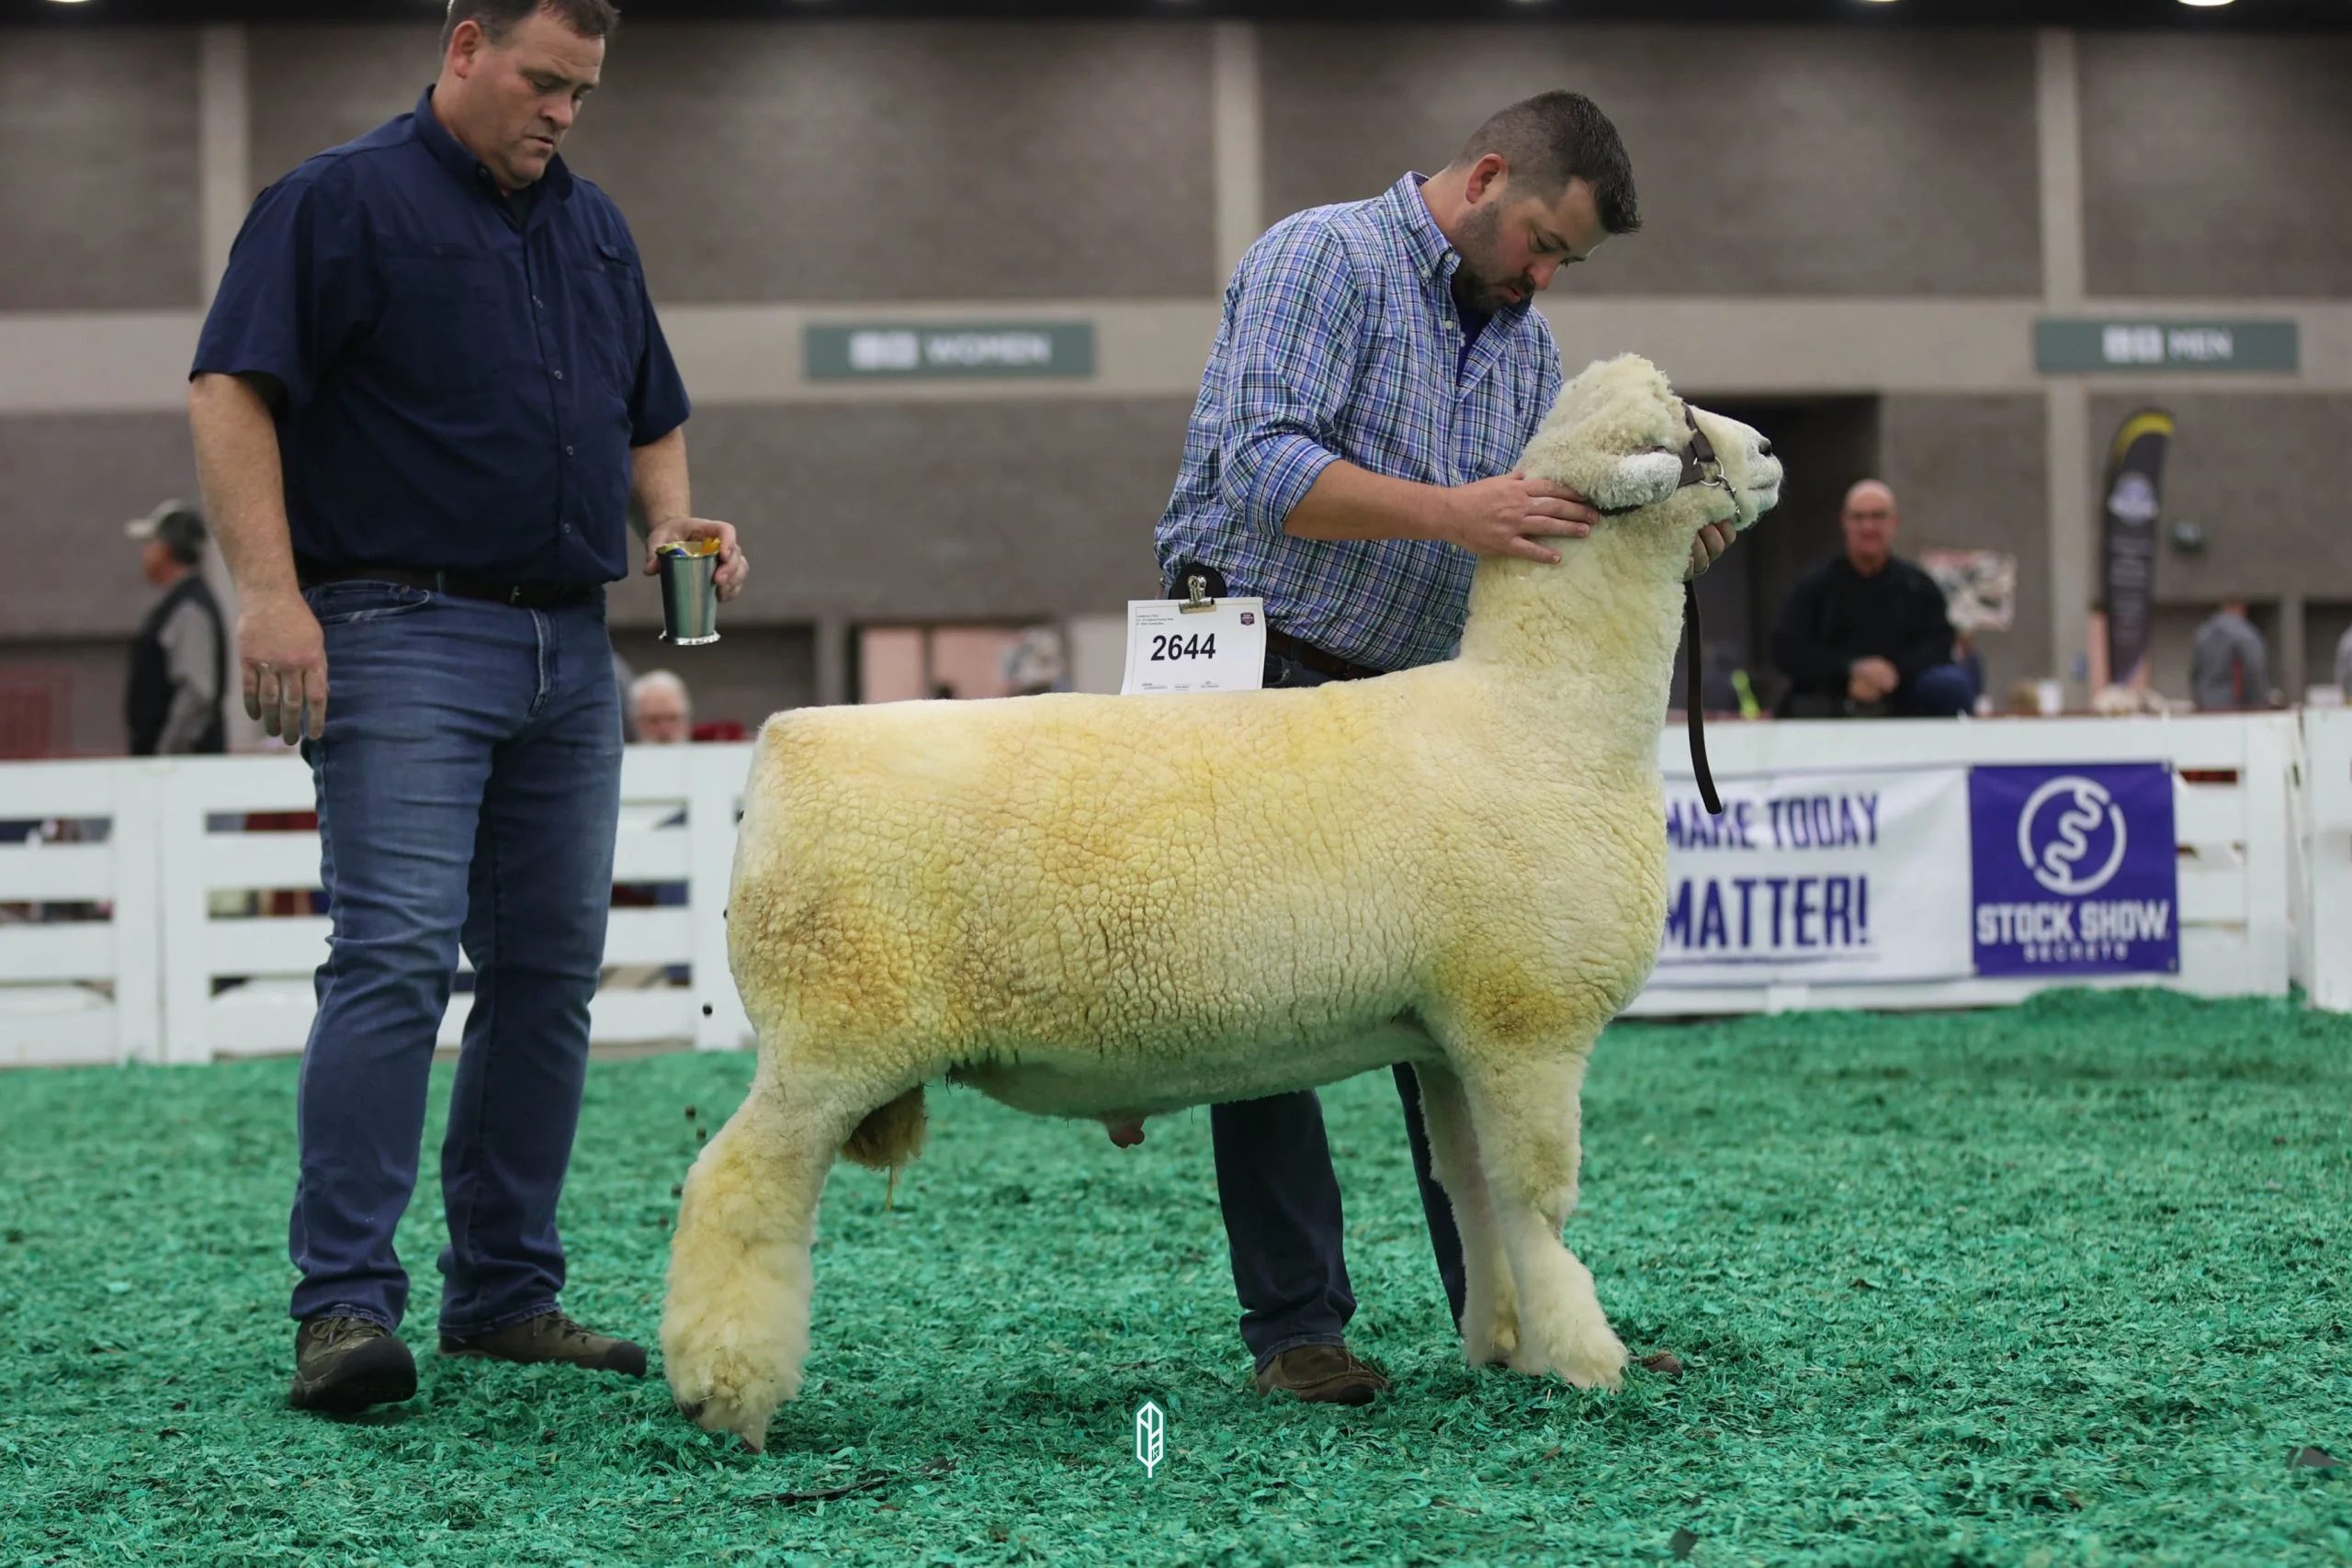 2023 National White Romney Show at NAILE
1st place yearling ram exhibited by Claire VonBehrens